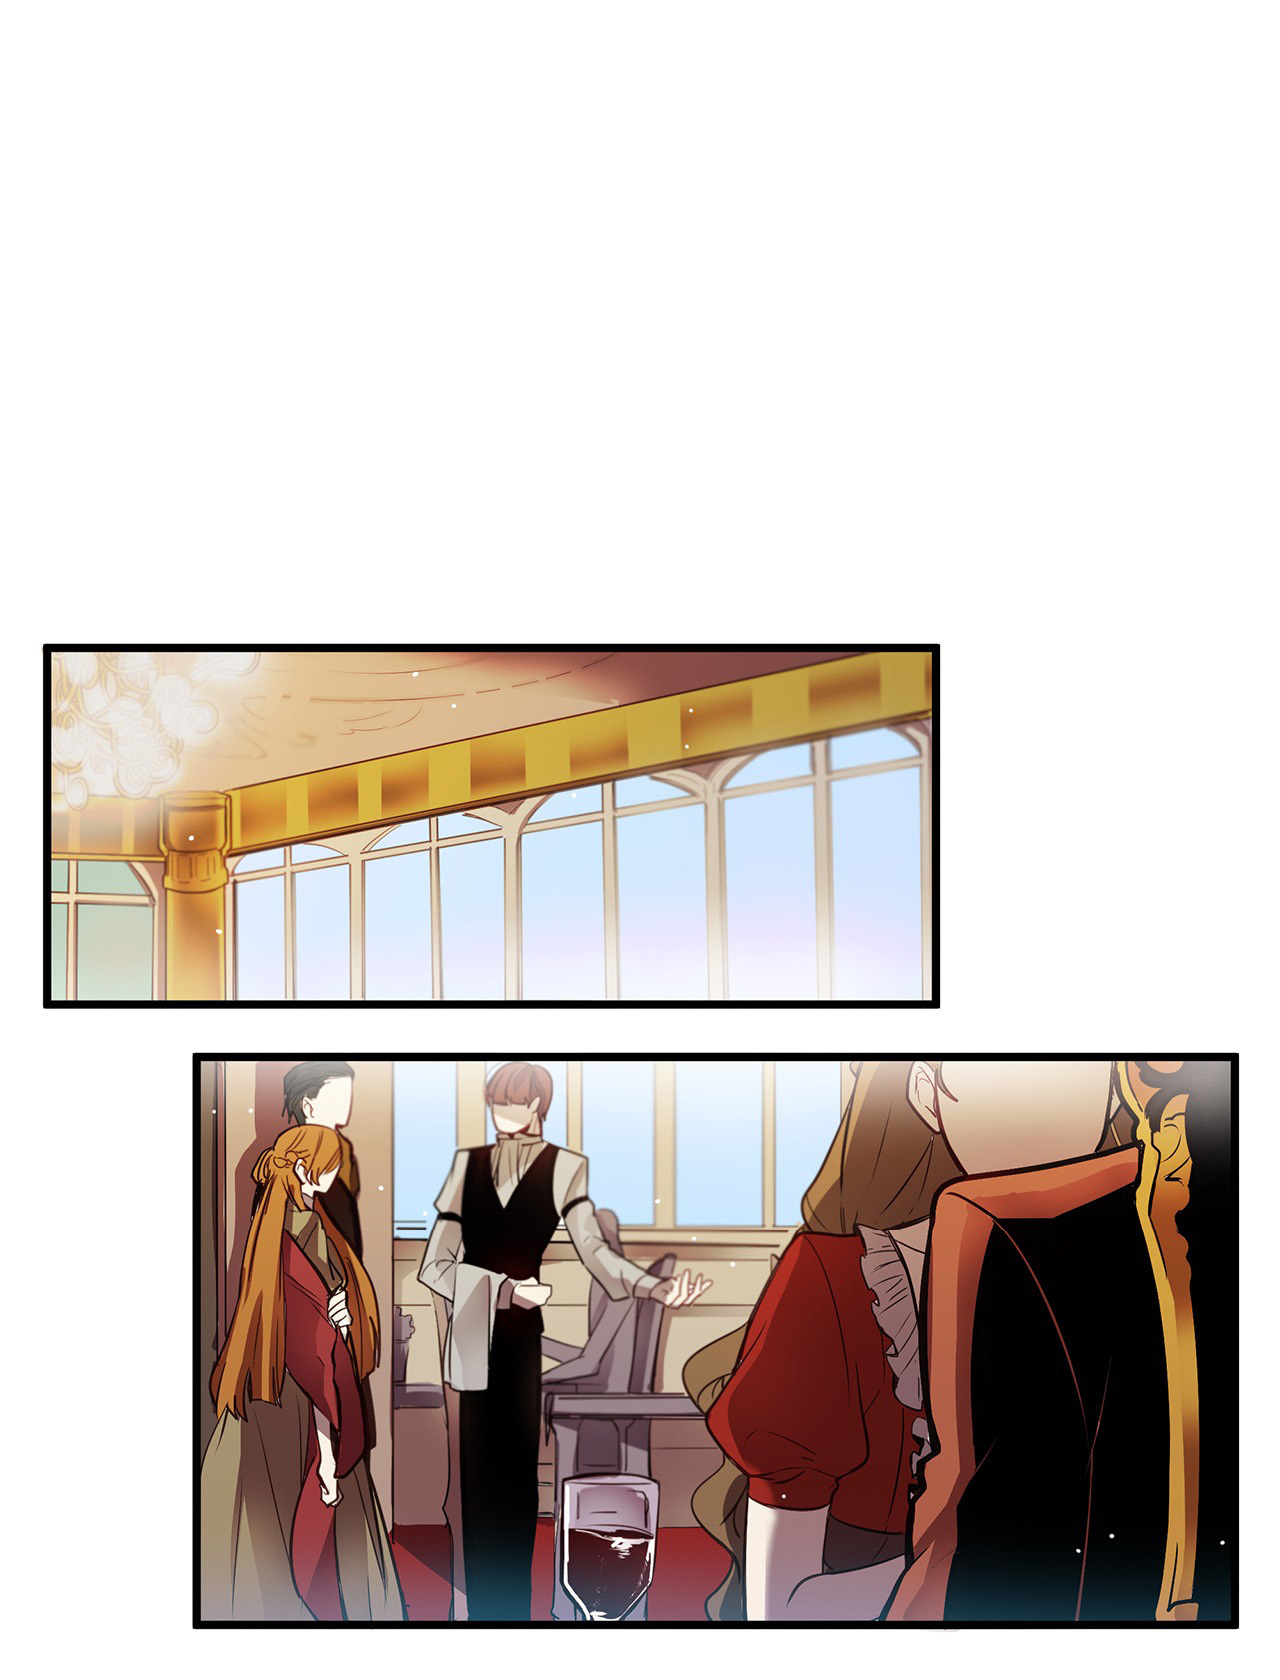 Living As The Emperor's Fiancé - Page 2